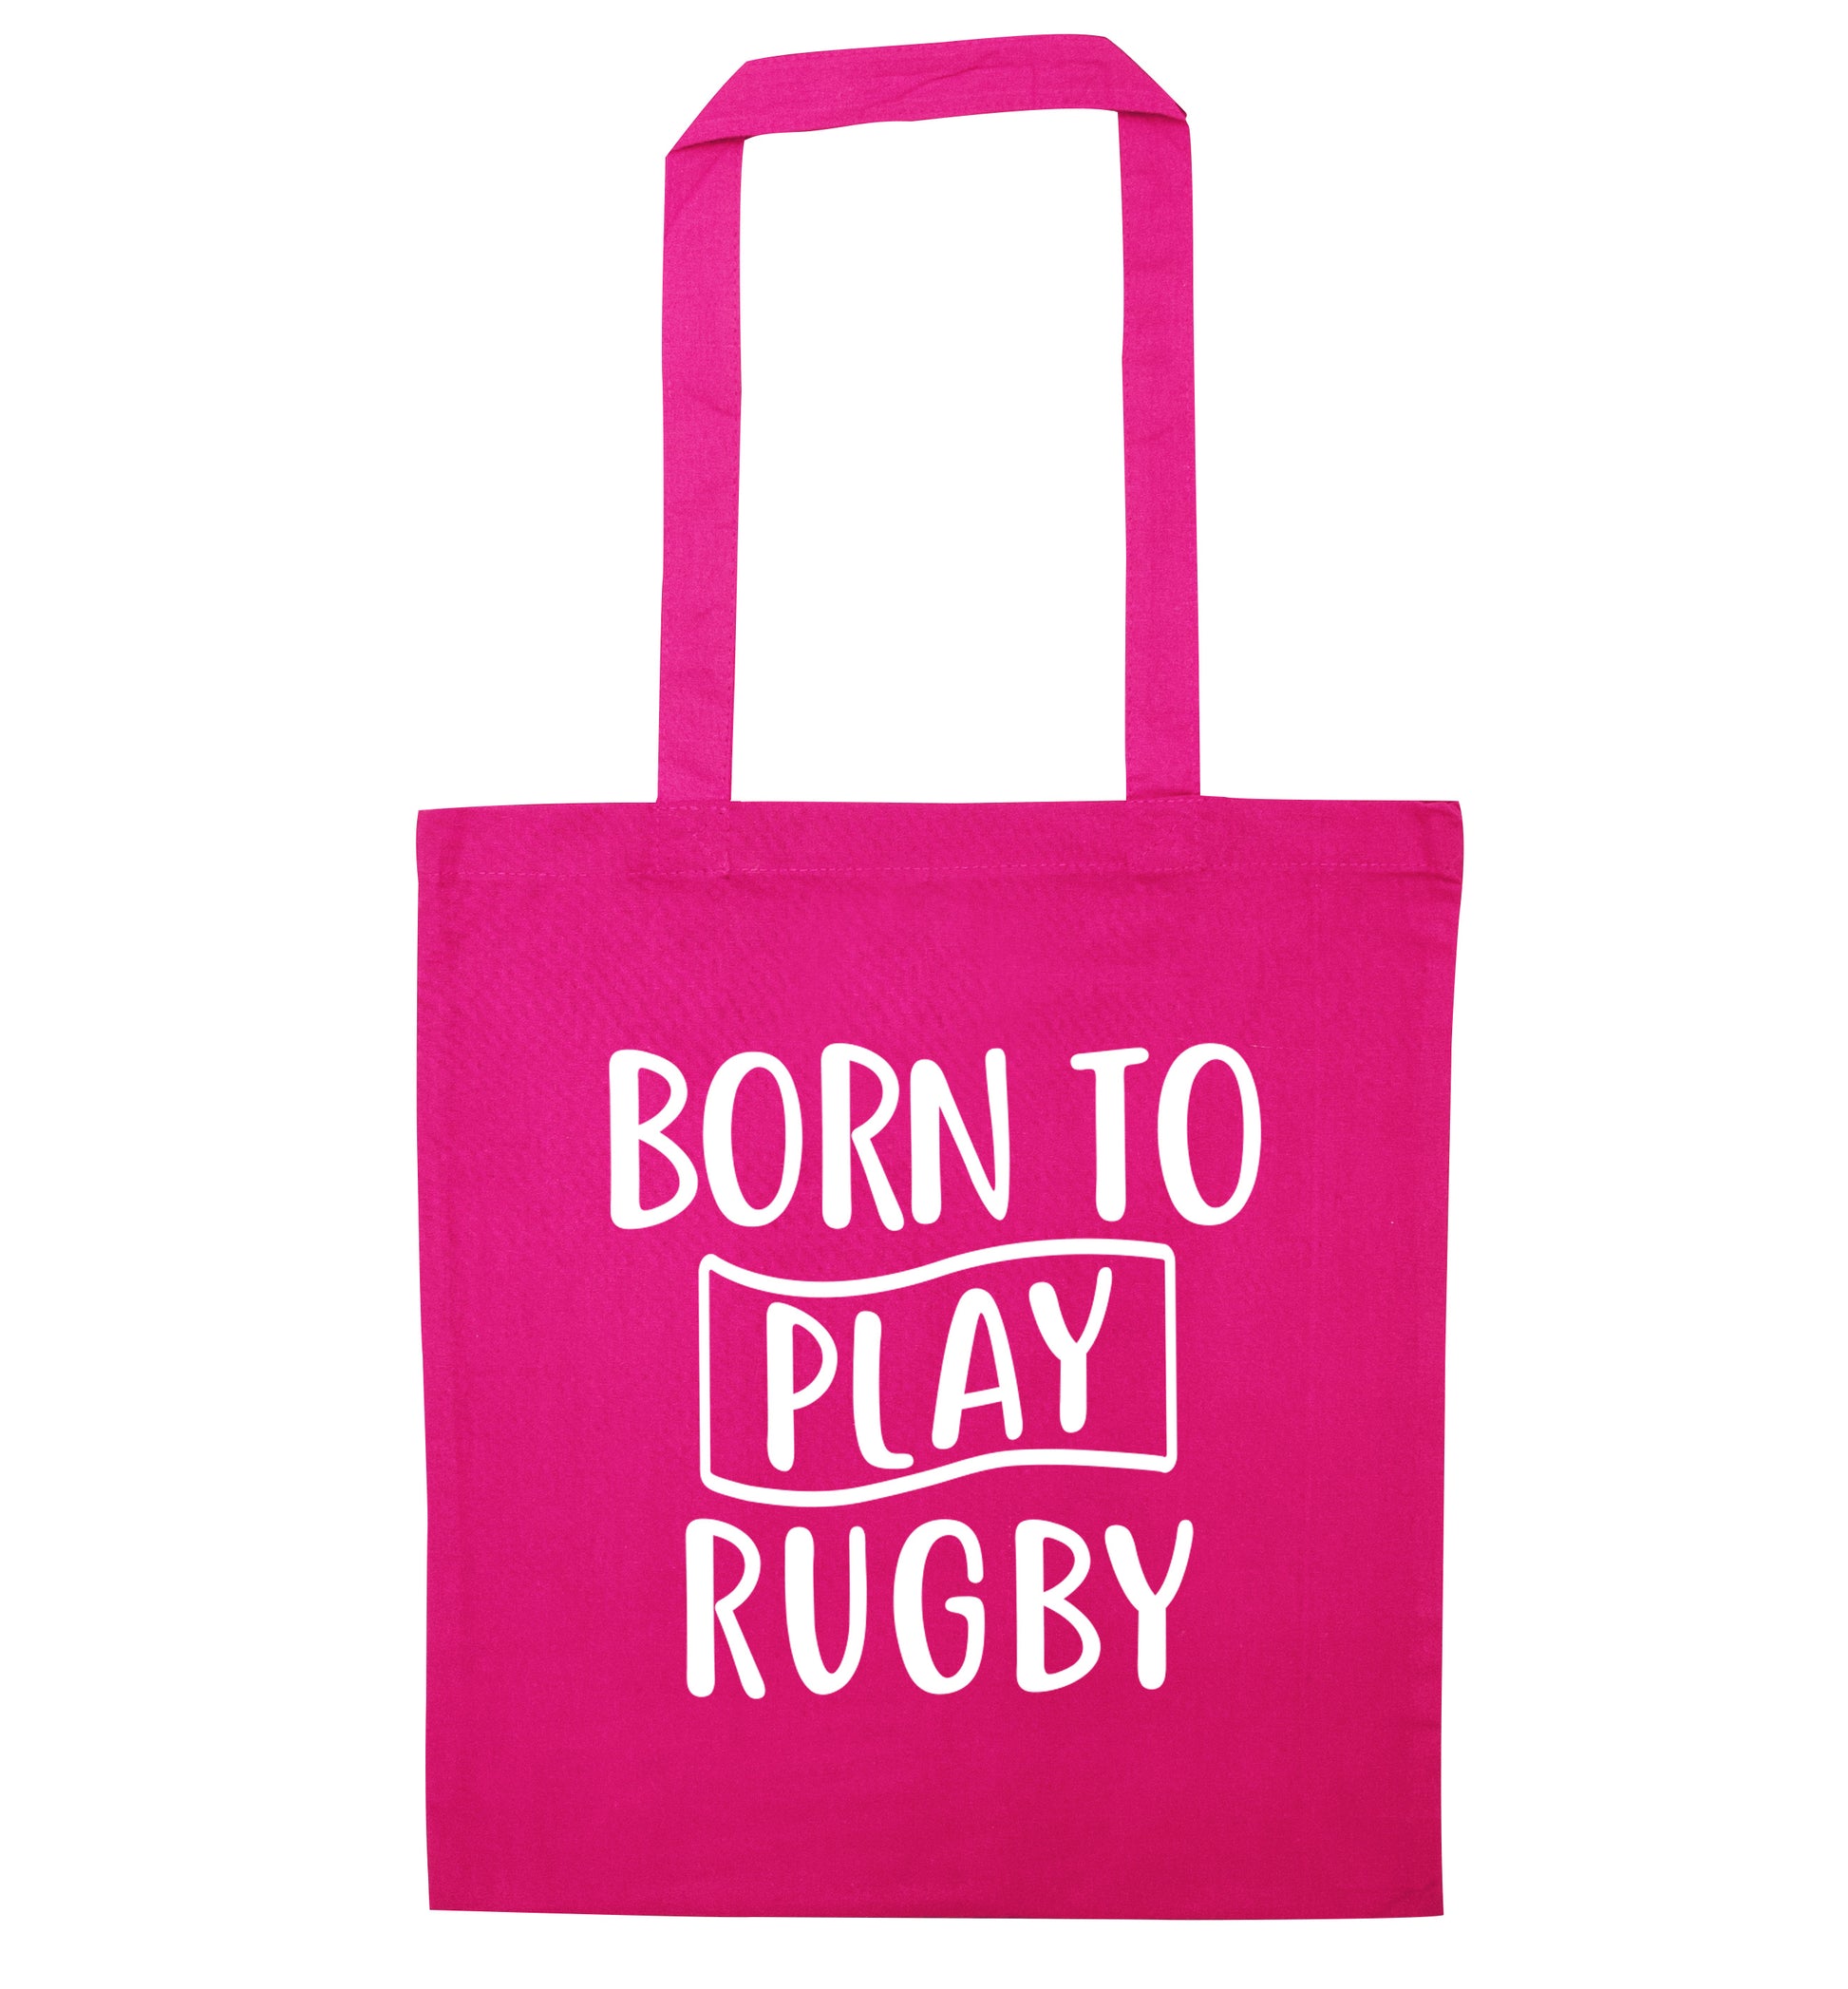 Born to play rugby pink tote bag